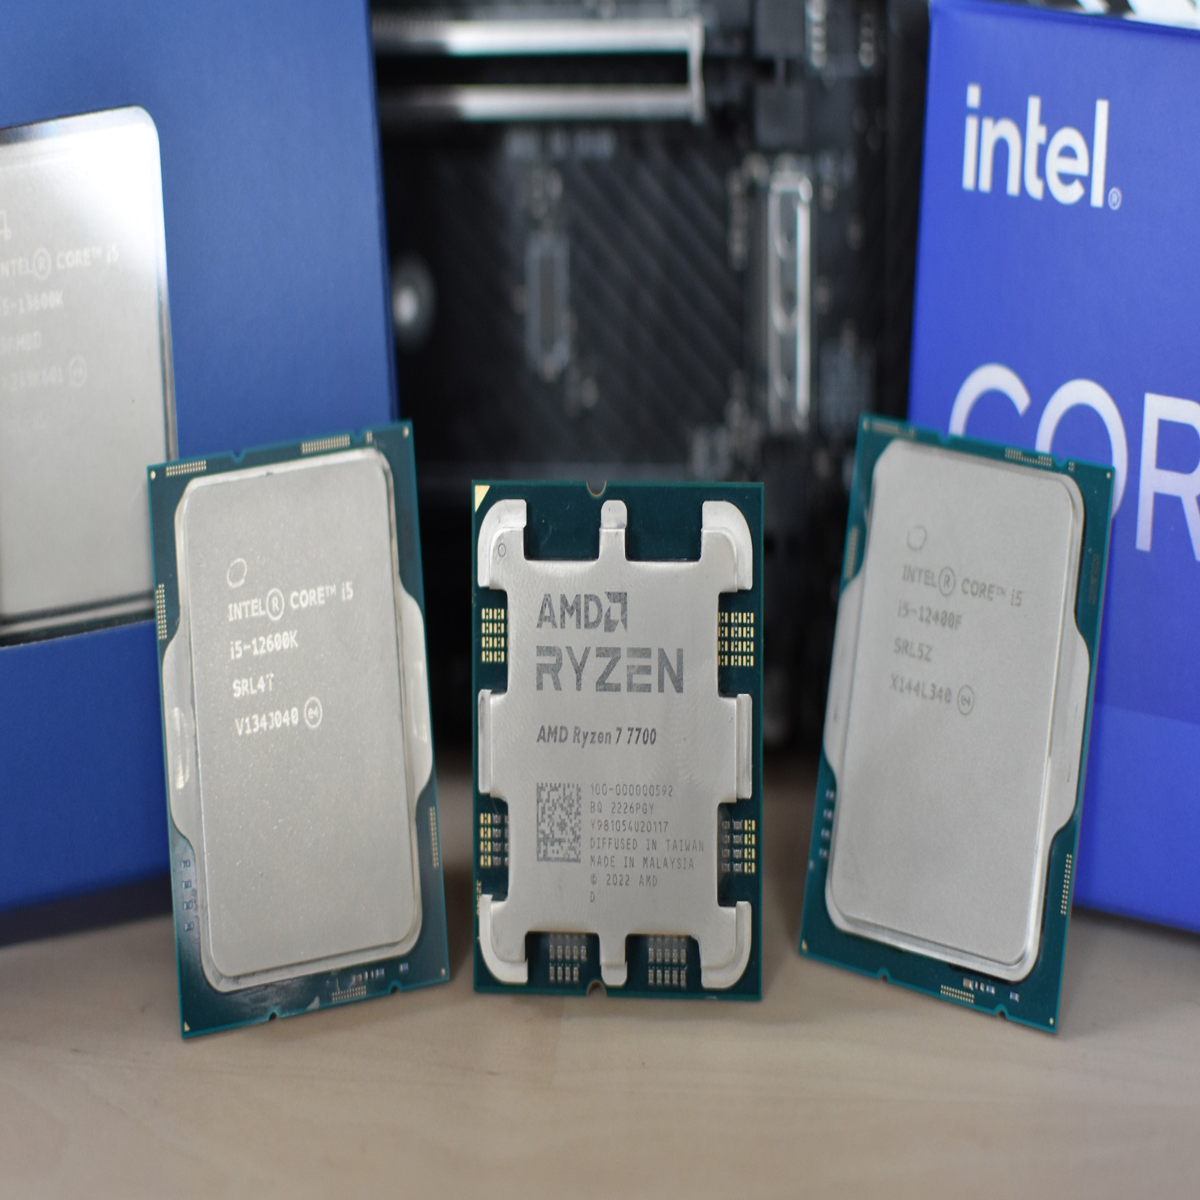 How to pick the best processor for your computer - Reviewed